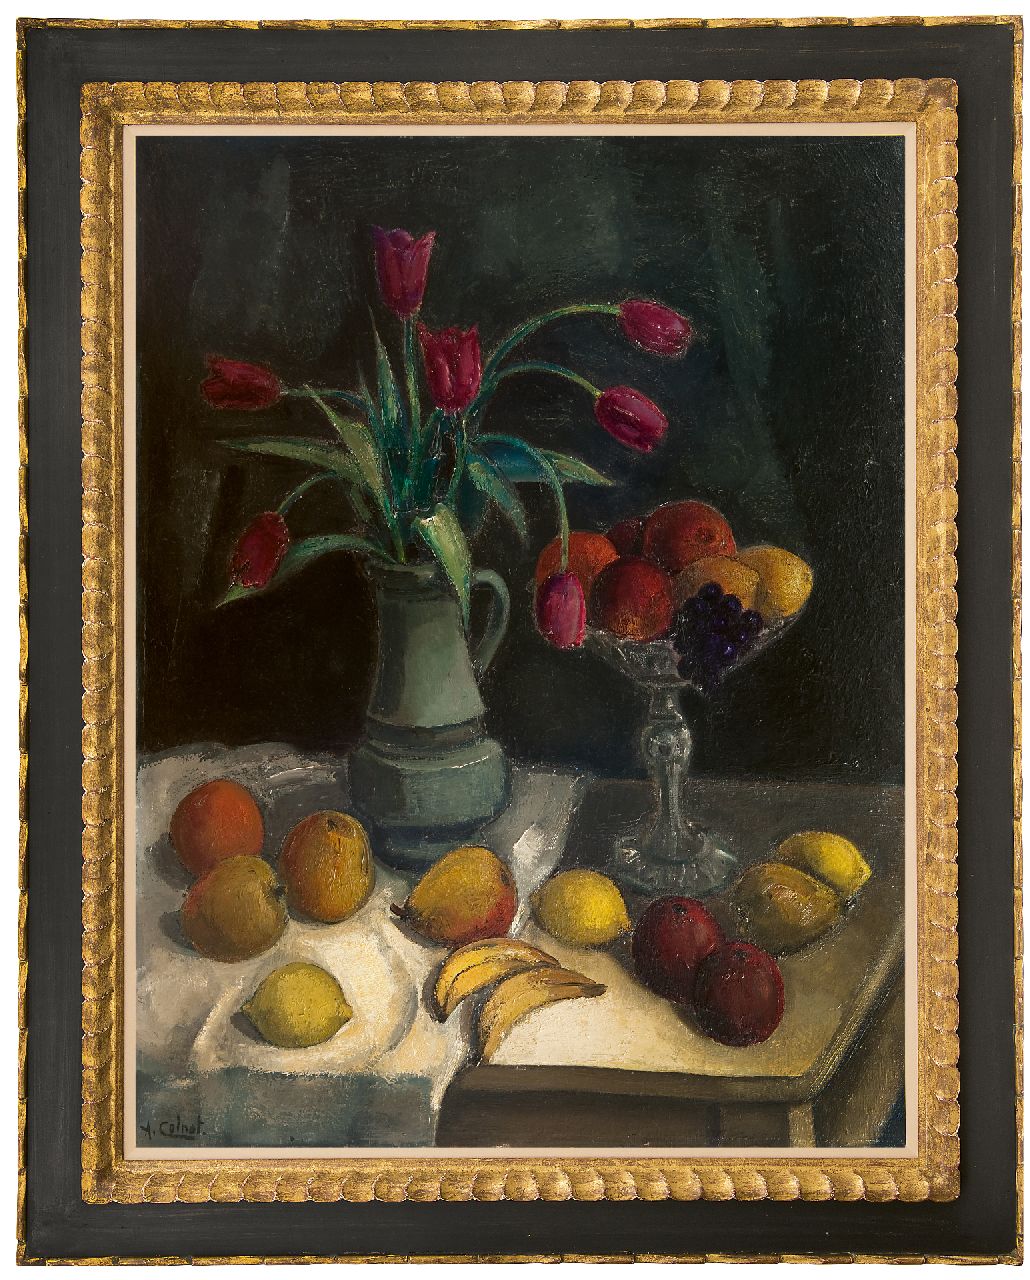 Colnot A.J.G.  | 'Arnout' Jacobus Gustaaf Colnot | Paintings offered for sale | A still life with fruit and tulips on a table, oil on canvas 92.2 x 70.4 cm, signed l.l.